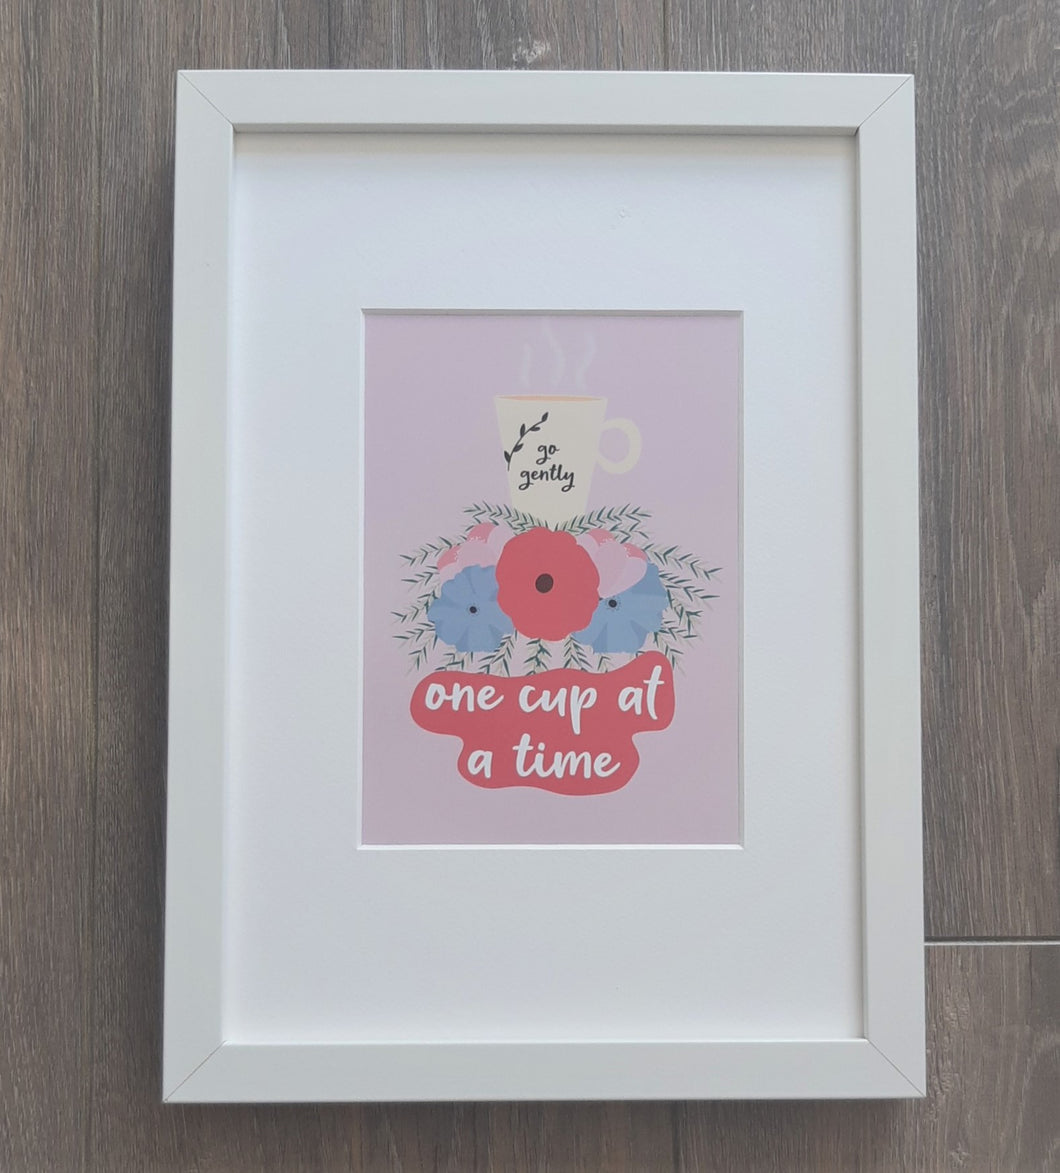 One Cup at a Time print by Sassy Jac